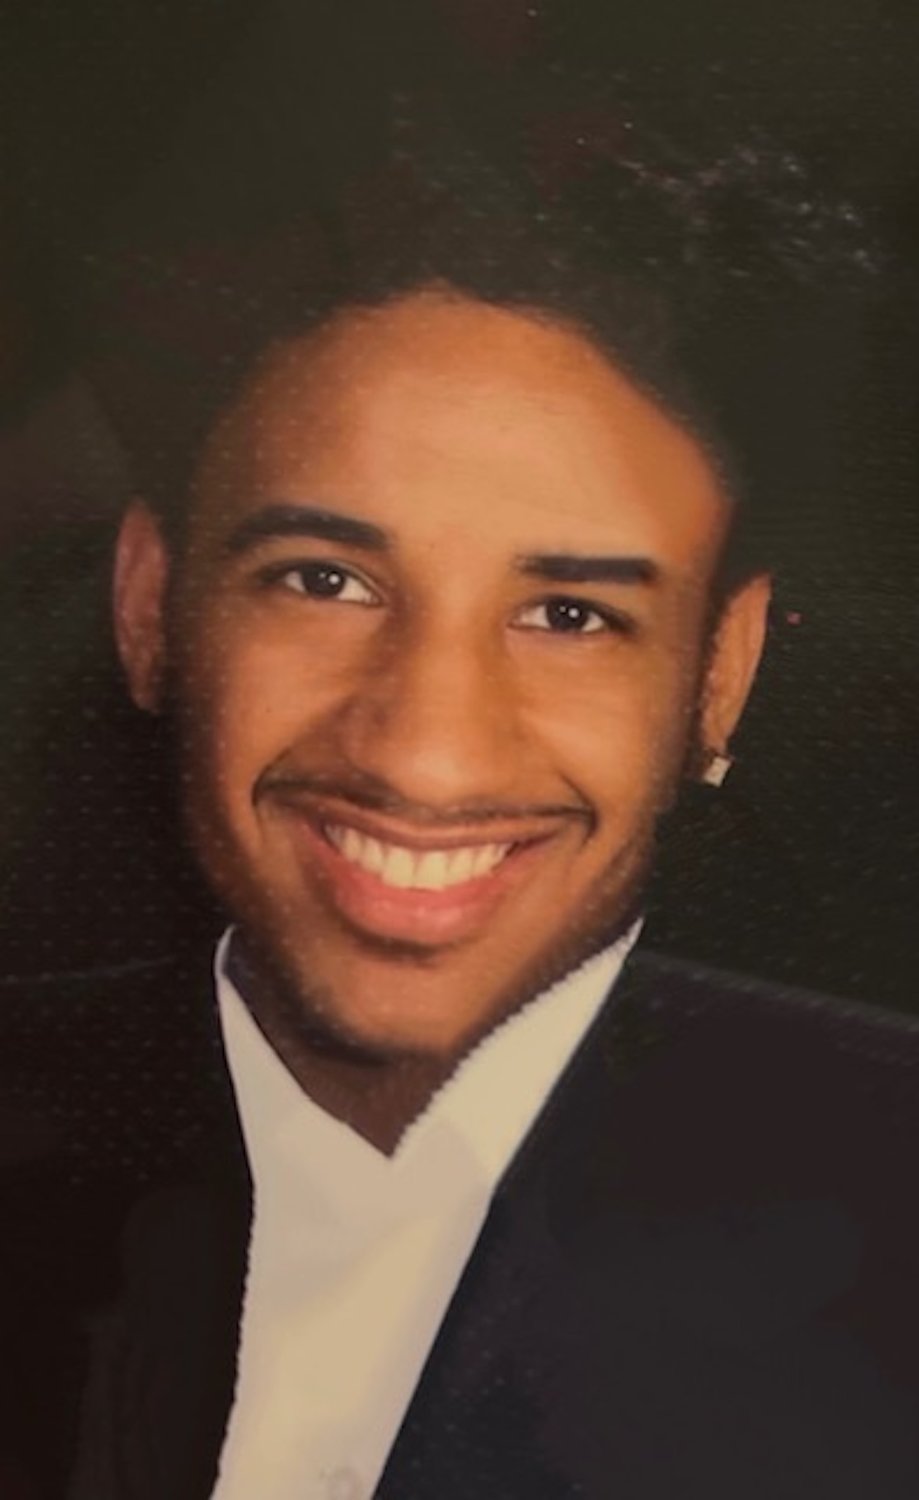 Rafael DeLossantos, 23, was laid to rest on Oct. 29 in Freeport, surrounded by his family, friends, and acquaintances whose lives he touched throughout his childhood and early adulthood on Long Island.